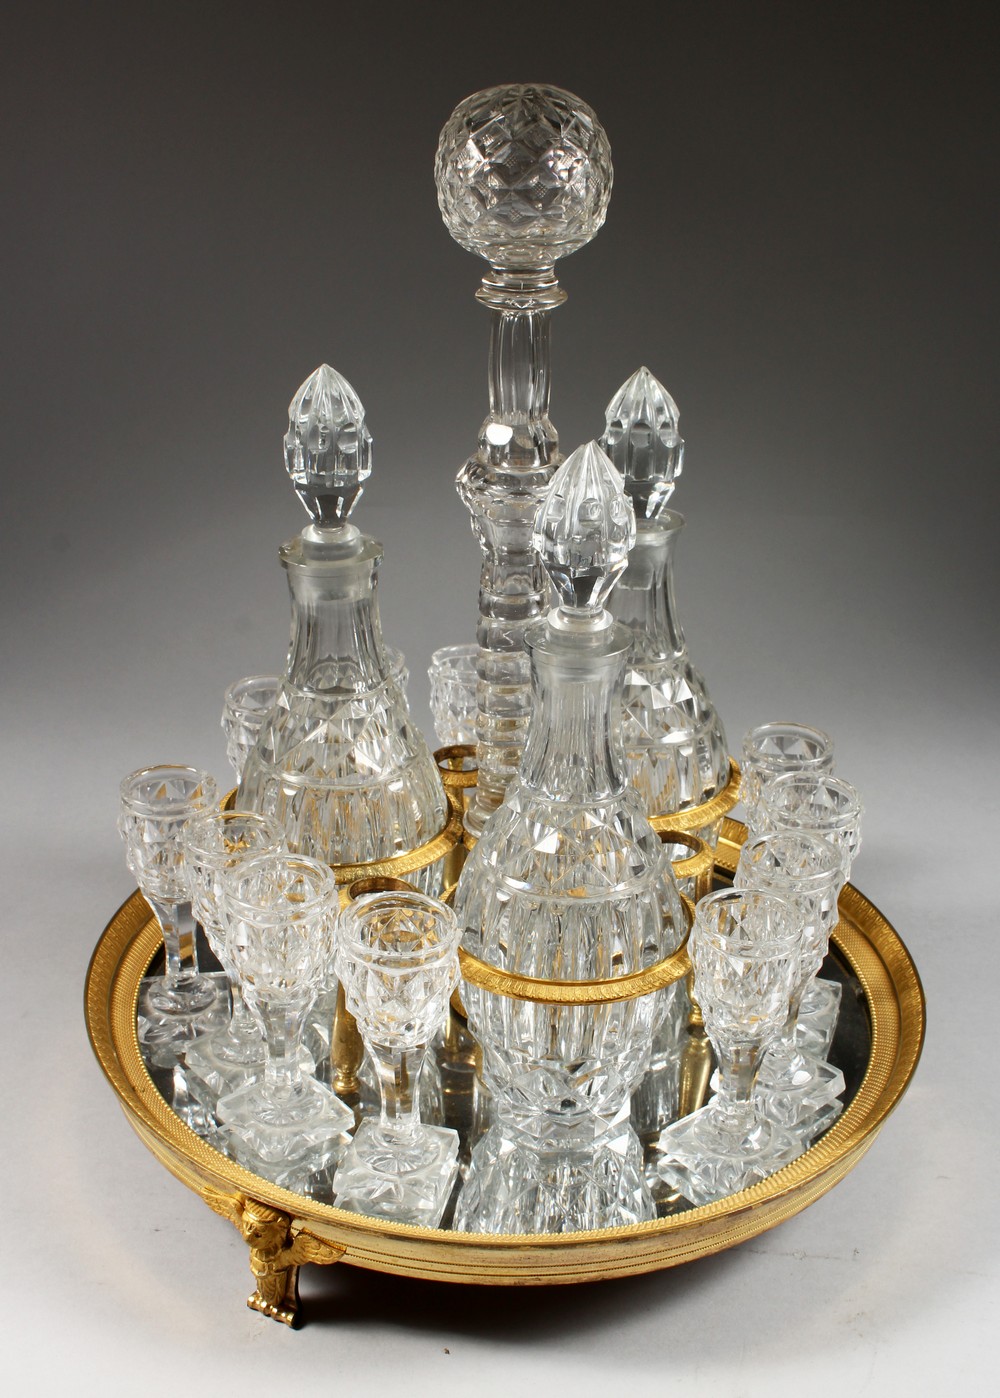 A SUPERB PIERRE-PHILIPPE THOMIRE MERCURY GILDED CIRCULAR DRINKS SET, complete with three decanters